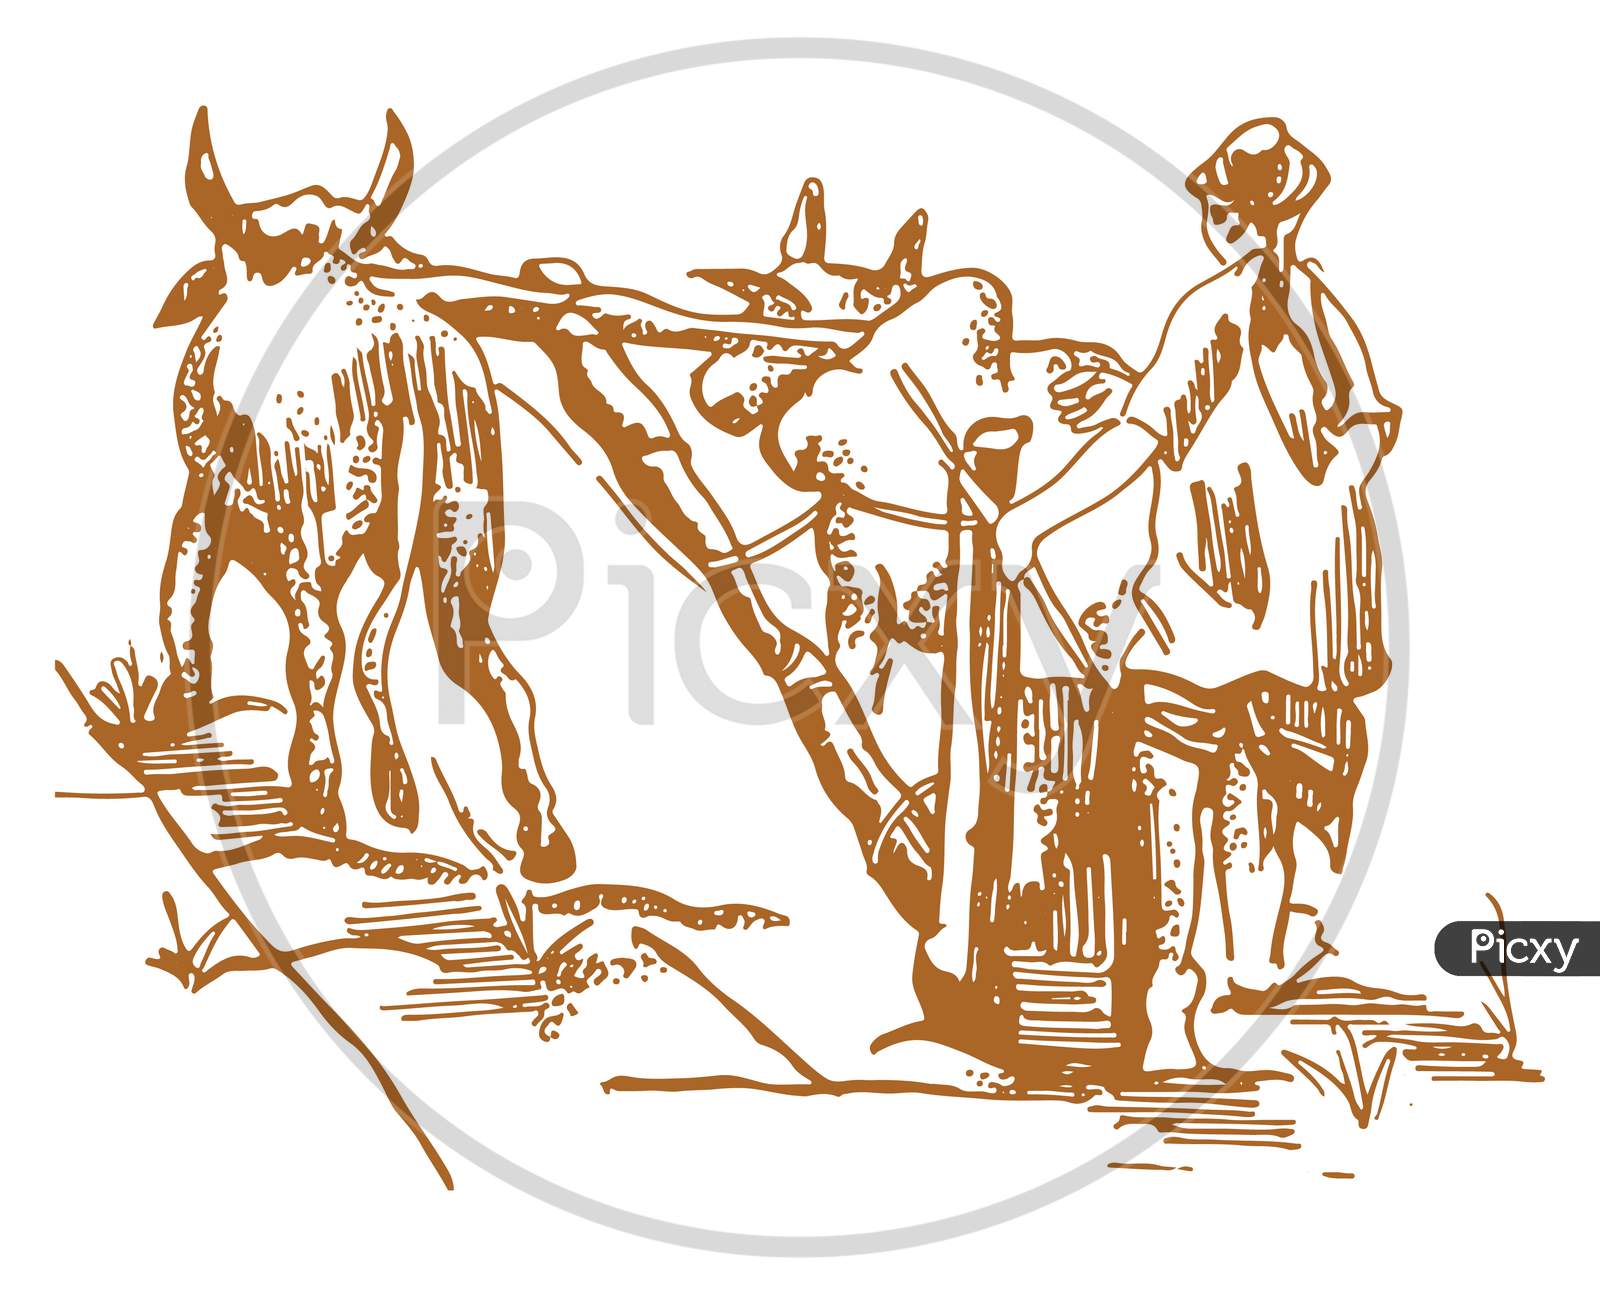 Farm Graphic Black White Landscape Sketch Illustration Vector Farmer  Looking At The Field Stock Illustration  Download Image Now  iStock